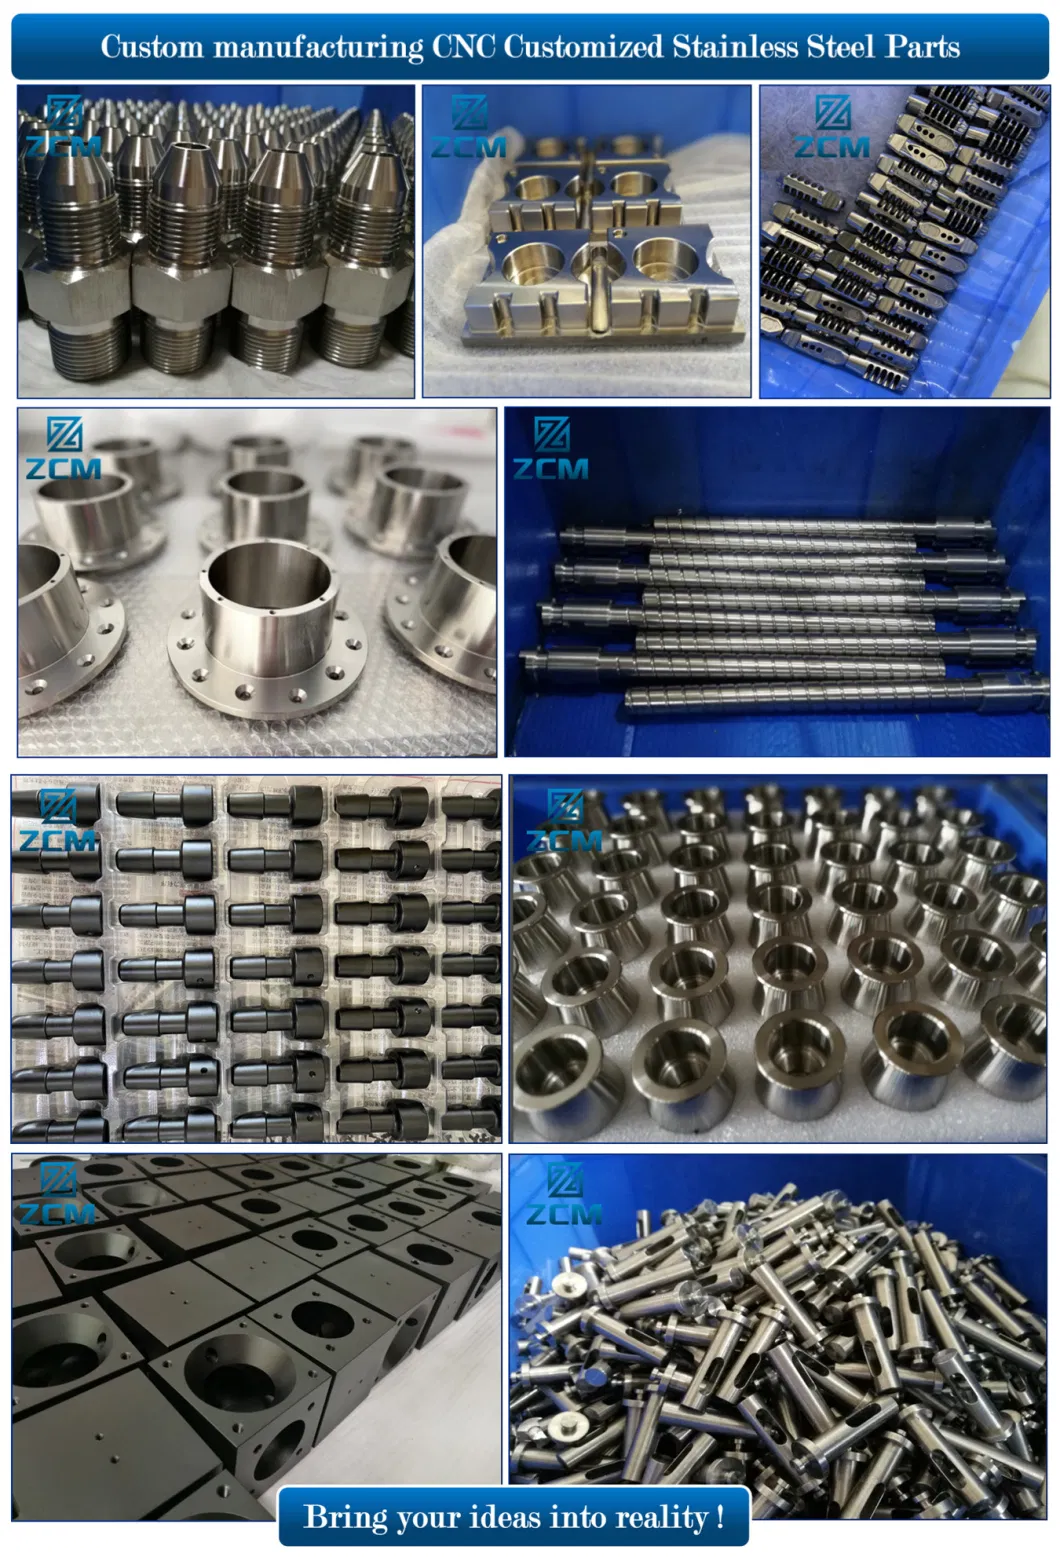 Shenzhen Custom Manufactured CNC Metal Milling Machined Automation Equipment/Industrial Electronics Stainless Steel Rapid Prototype